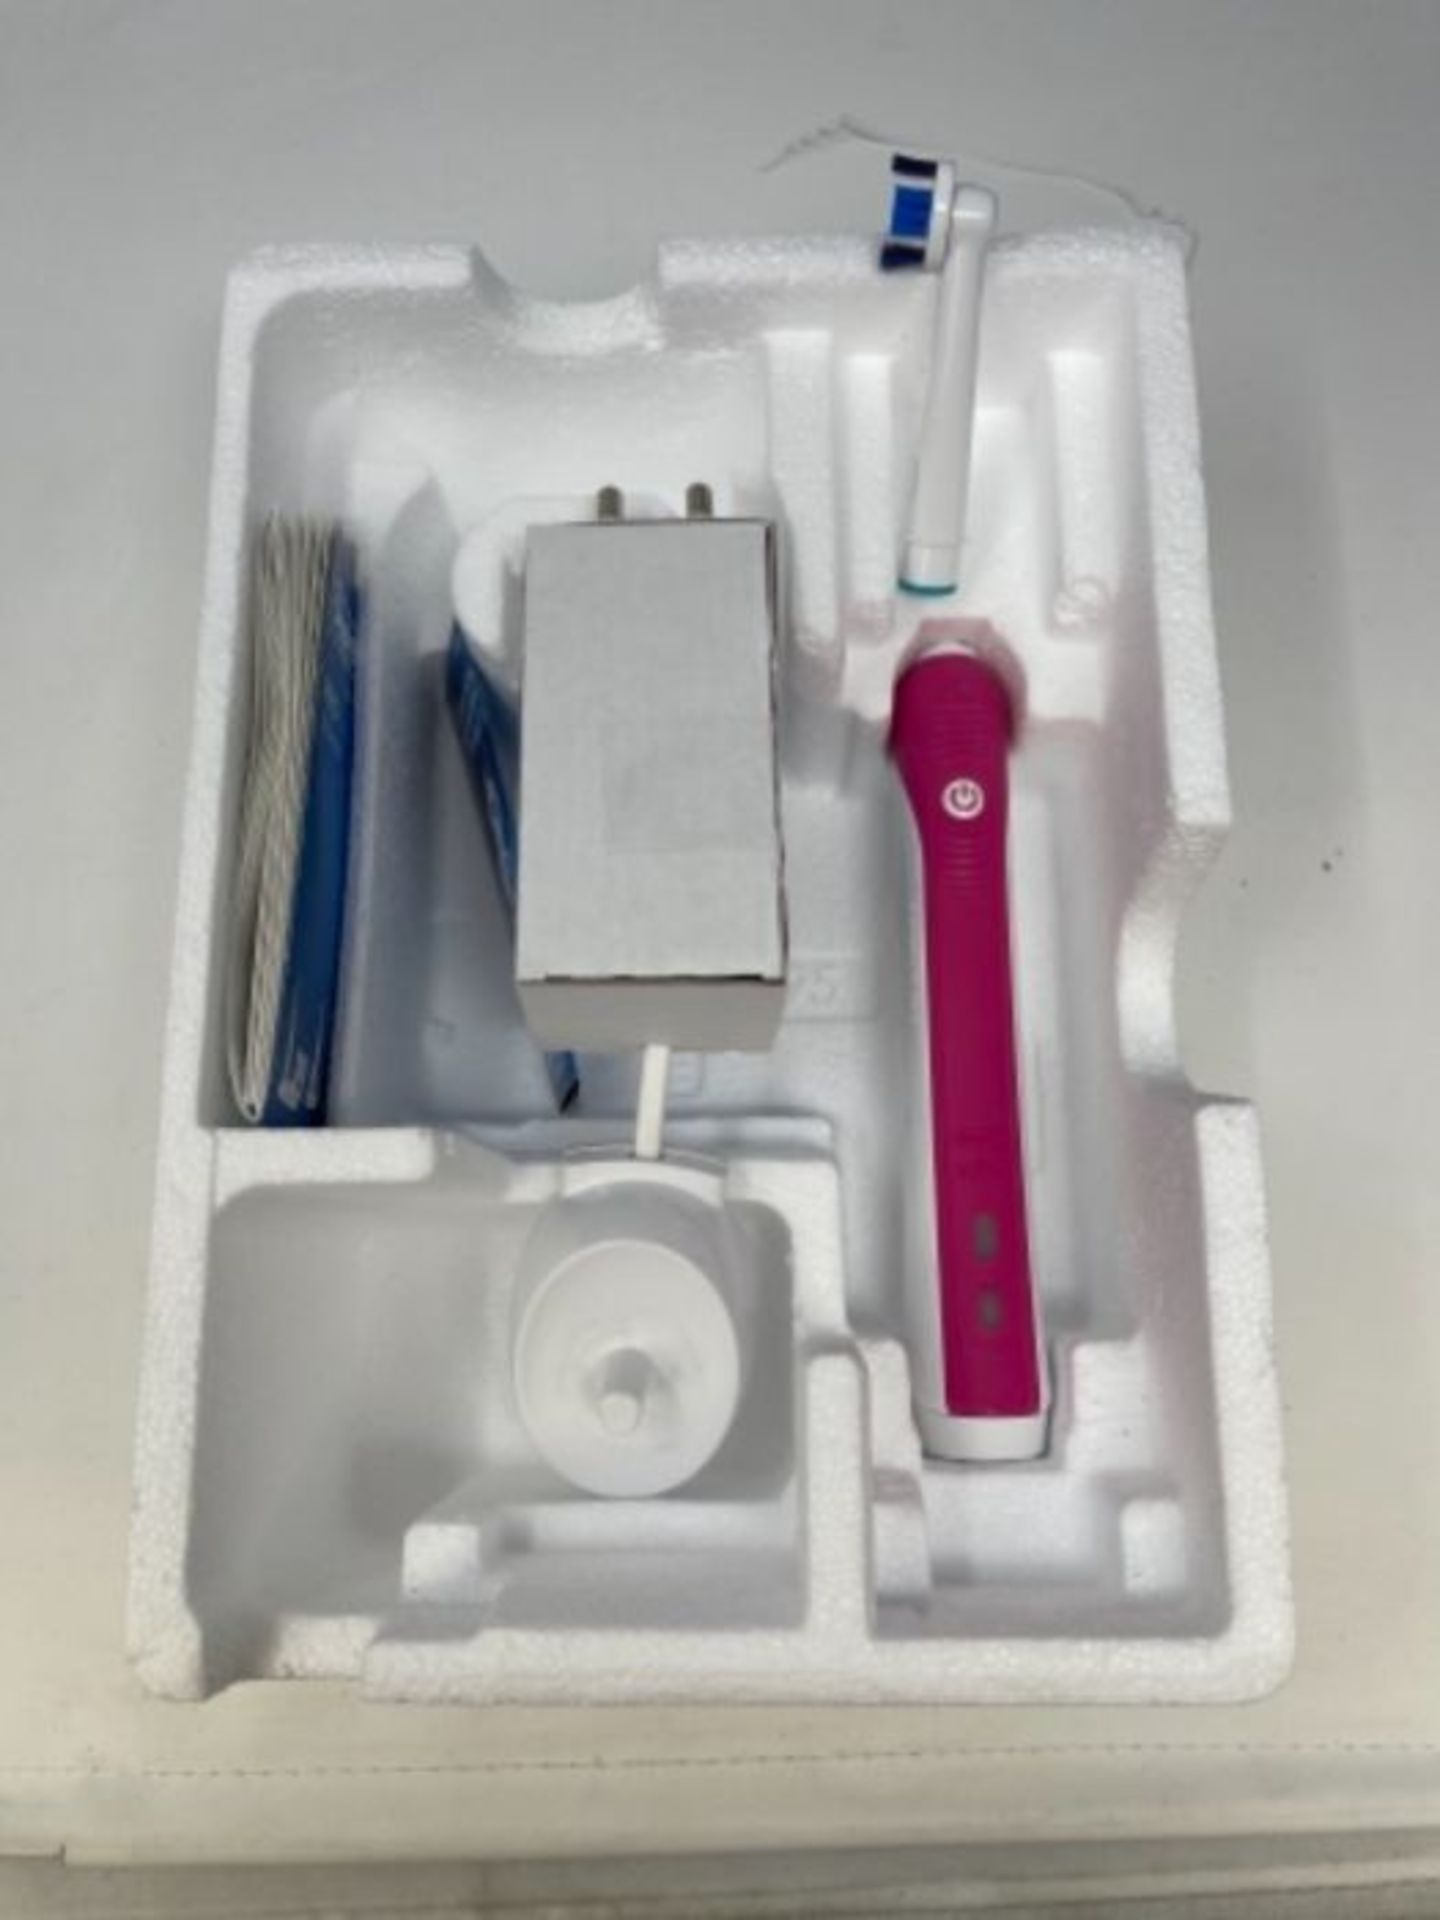 Oral-B Pro 650 3D White Electric Rechargeable Toothbrush Powered by Braun, 1 Pink Hand - Image 2 of 2